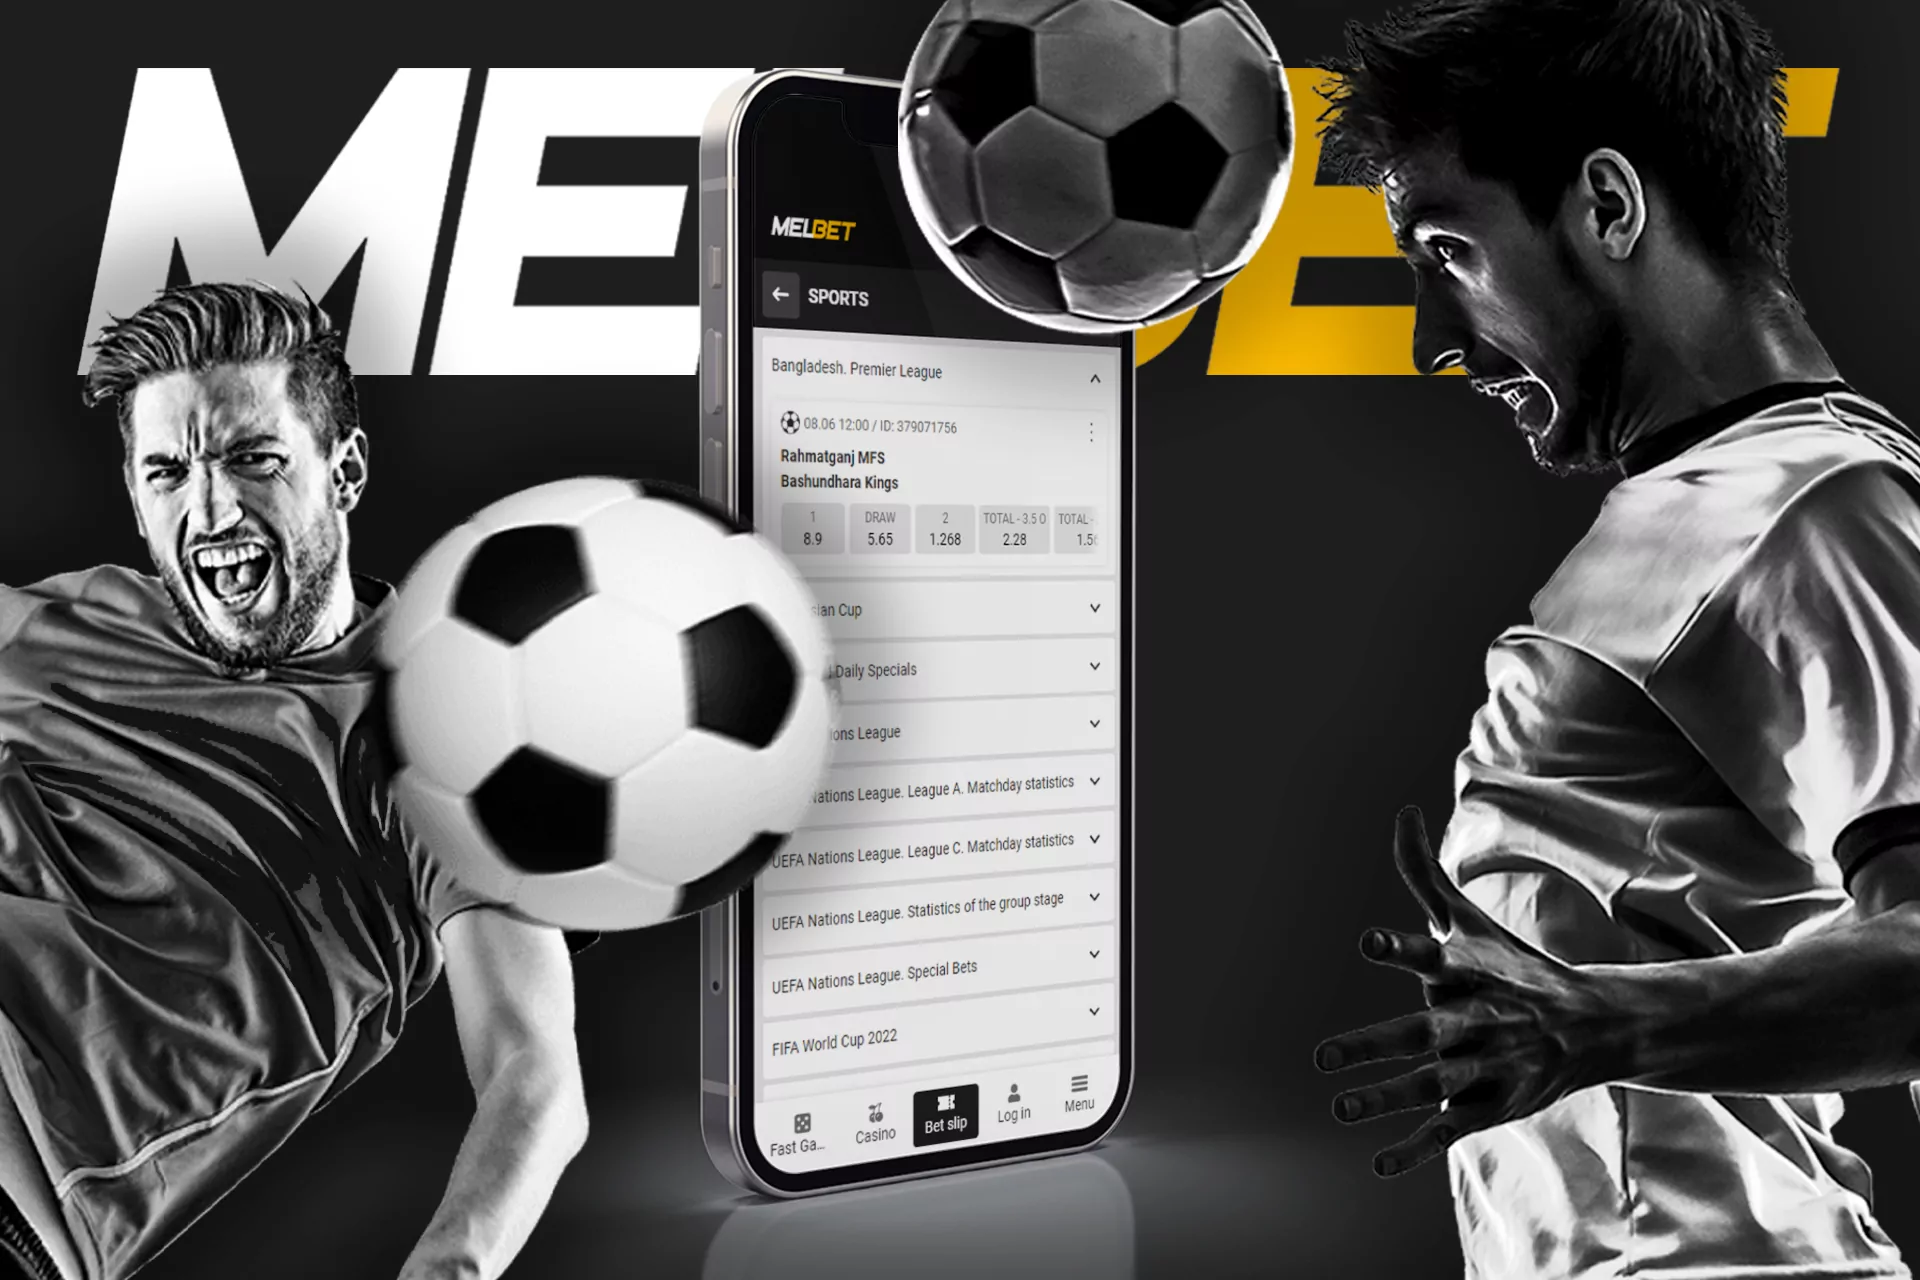 You can also place bets on football events in the Melbet app.